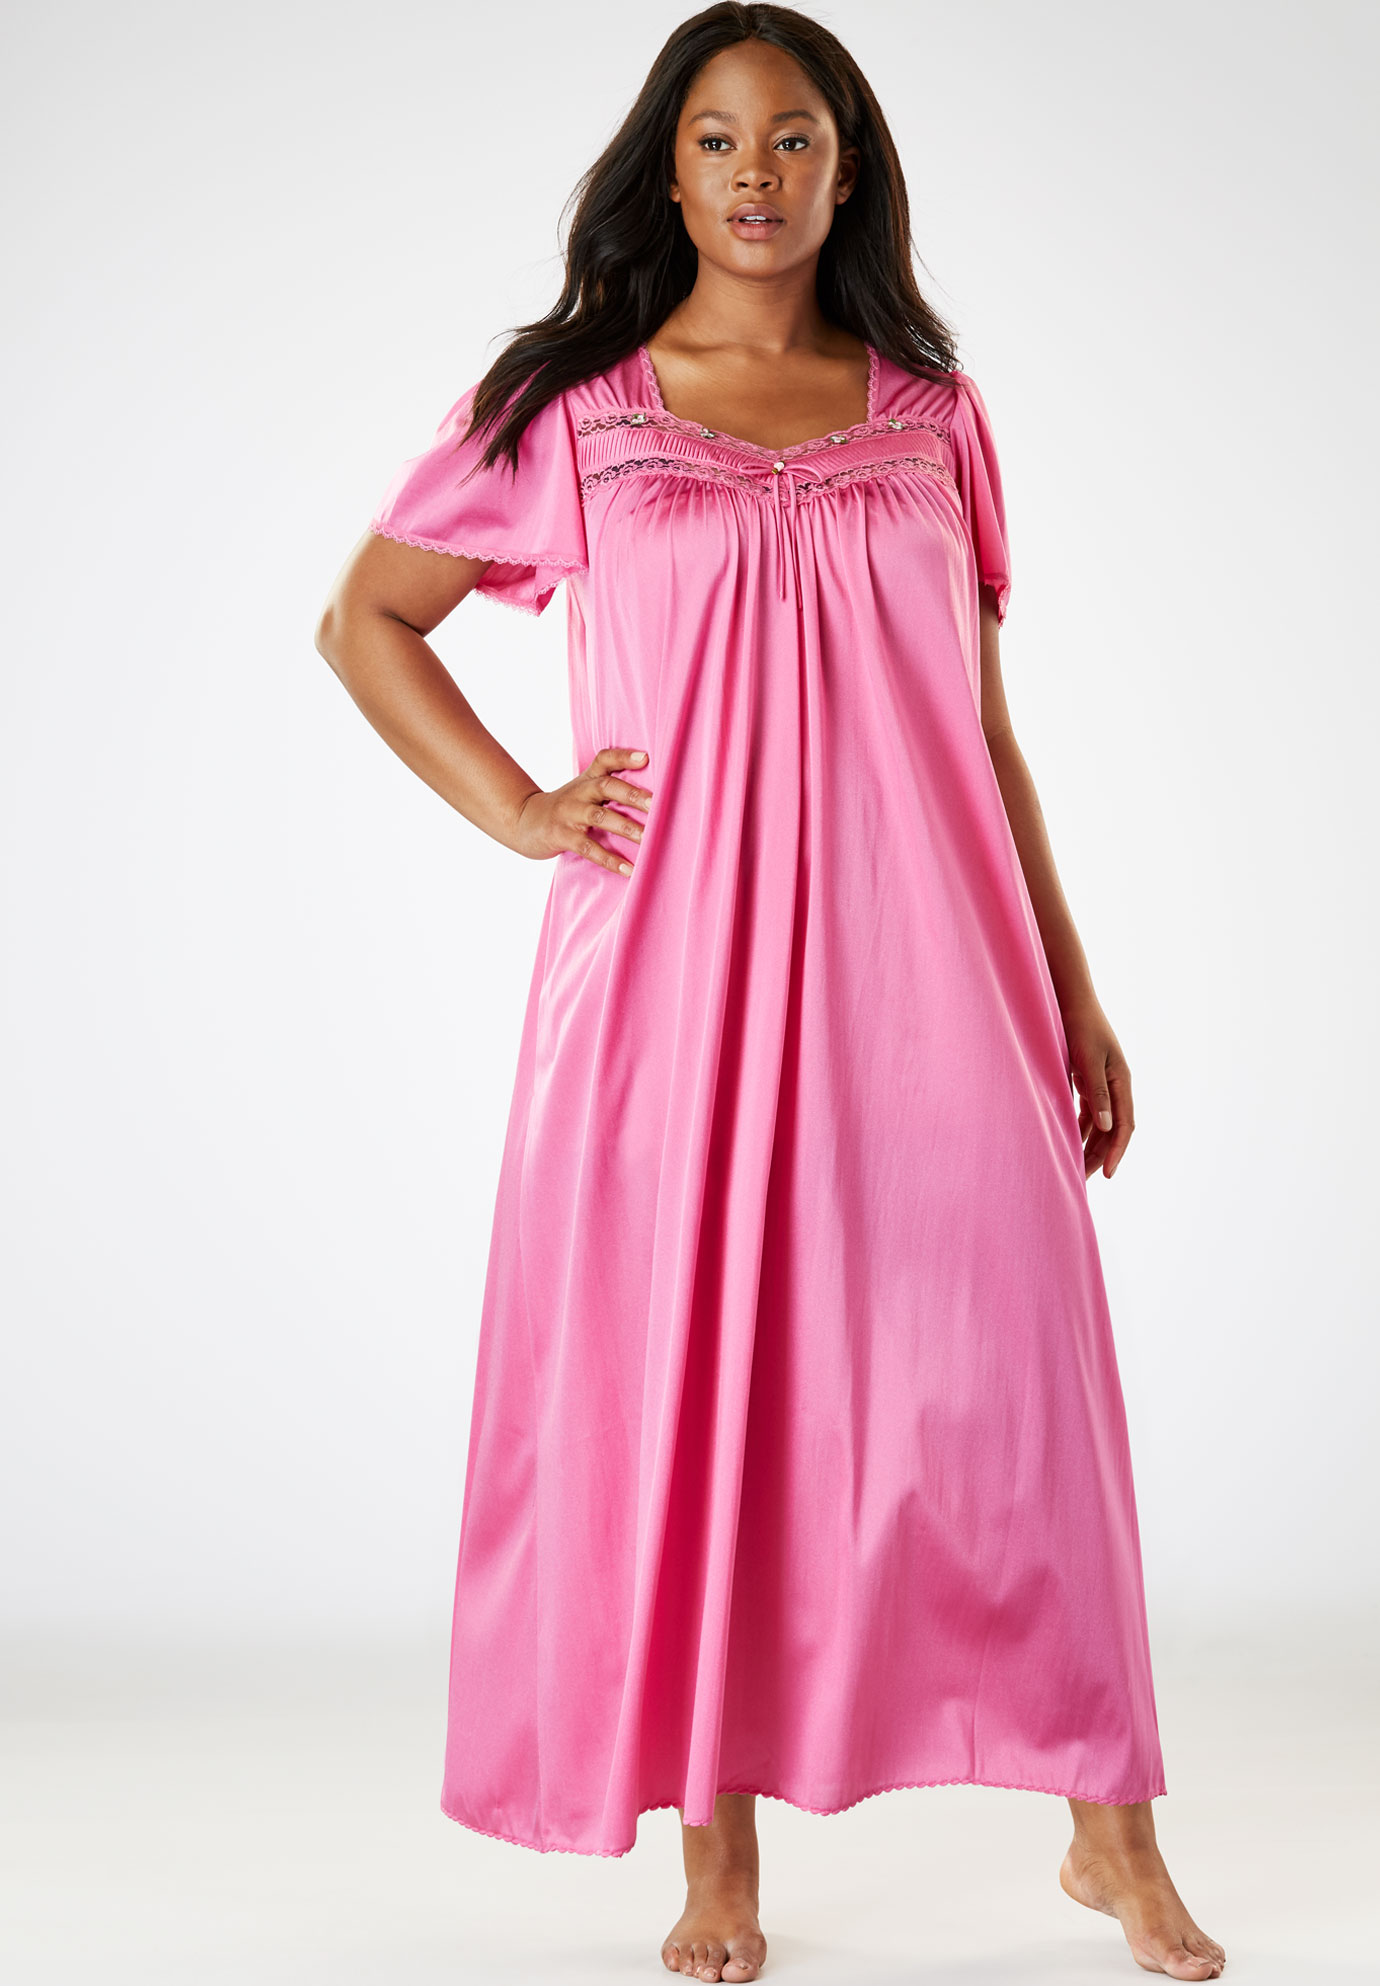 Full Sweep Nightgown By Only Necessities® Plus Size Nightgowns Roaman S